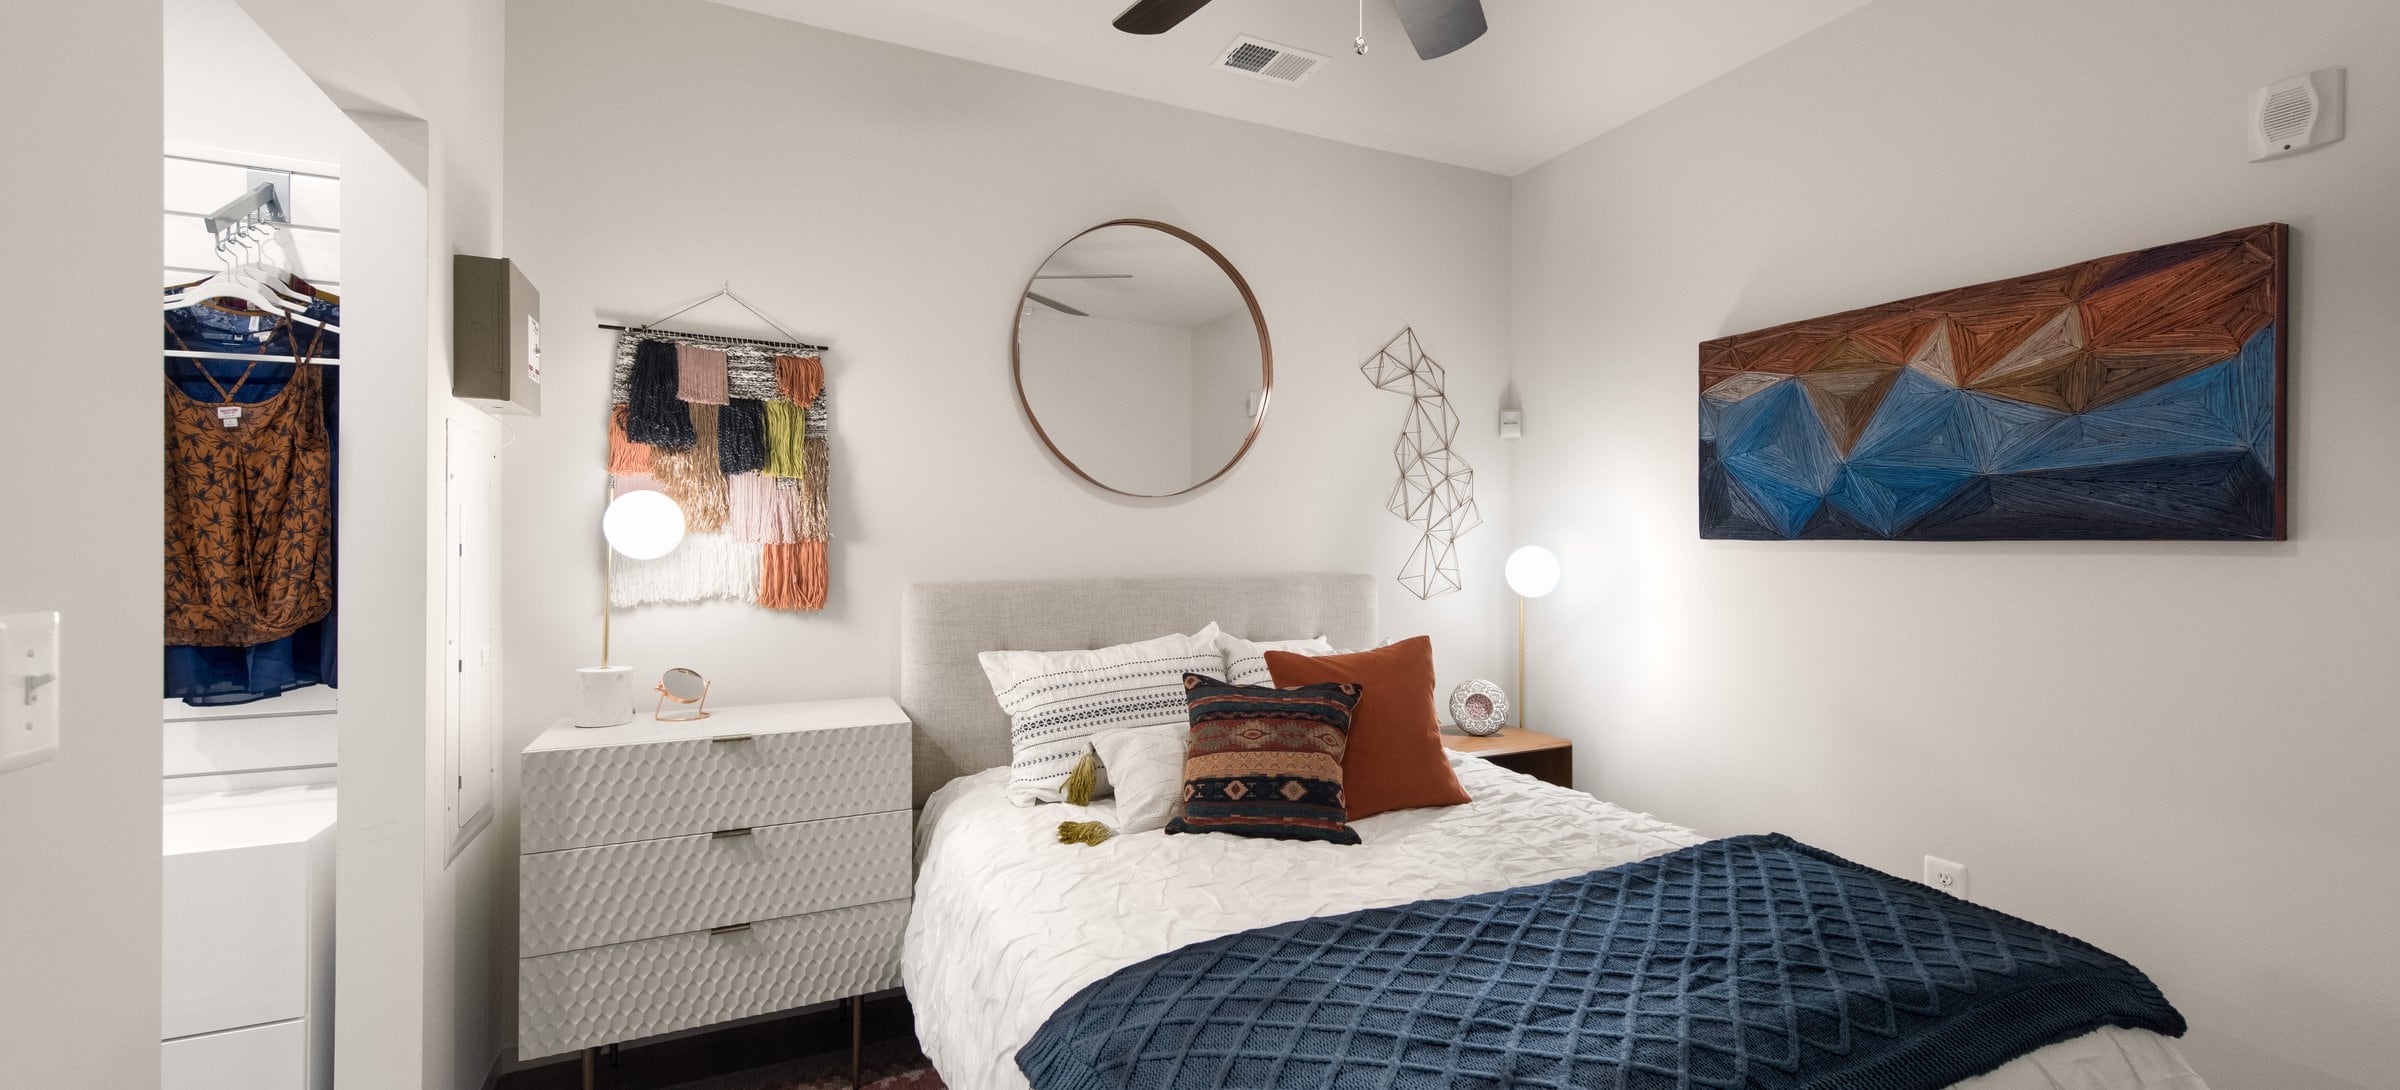 Bedroom with ceiling fan and hard surface flooring